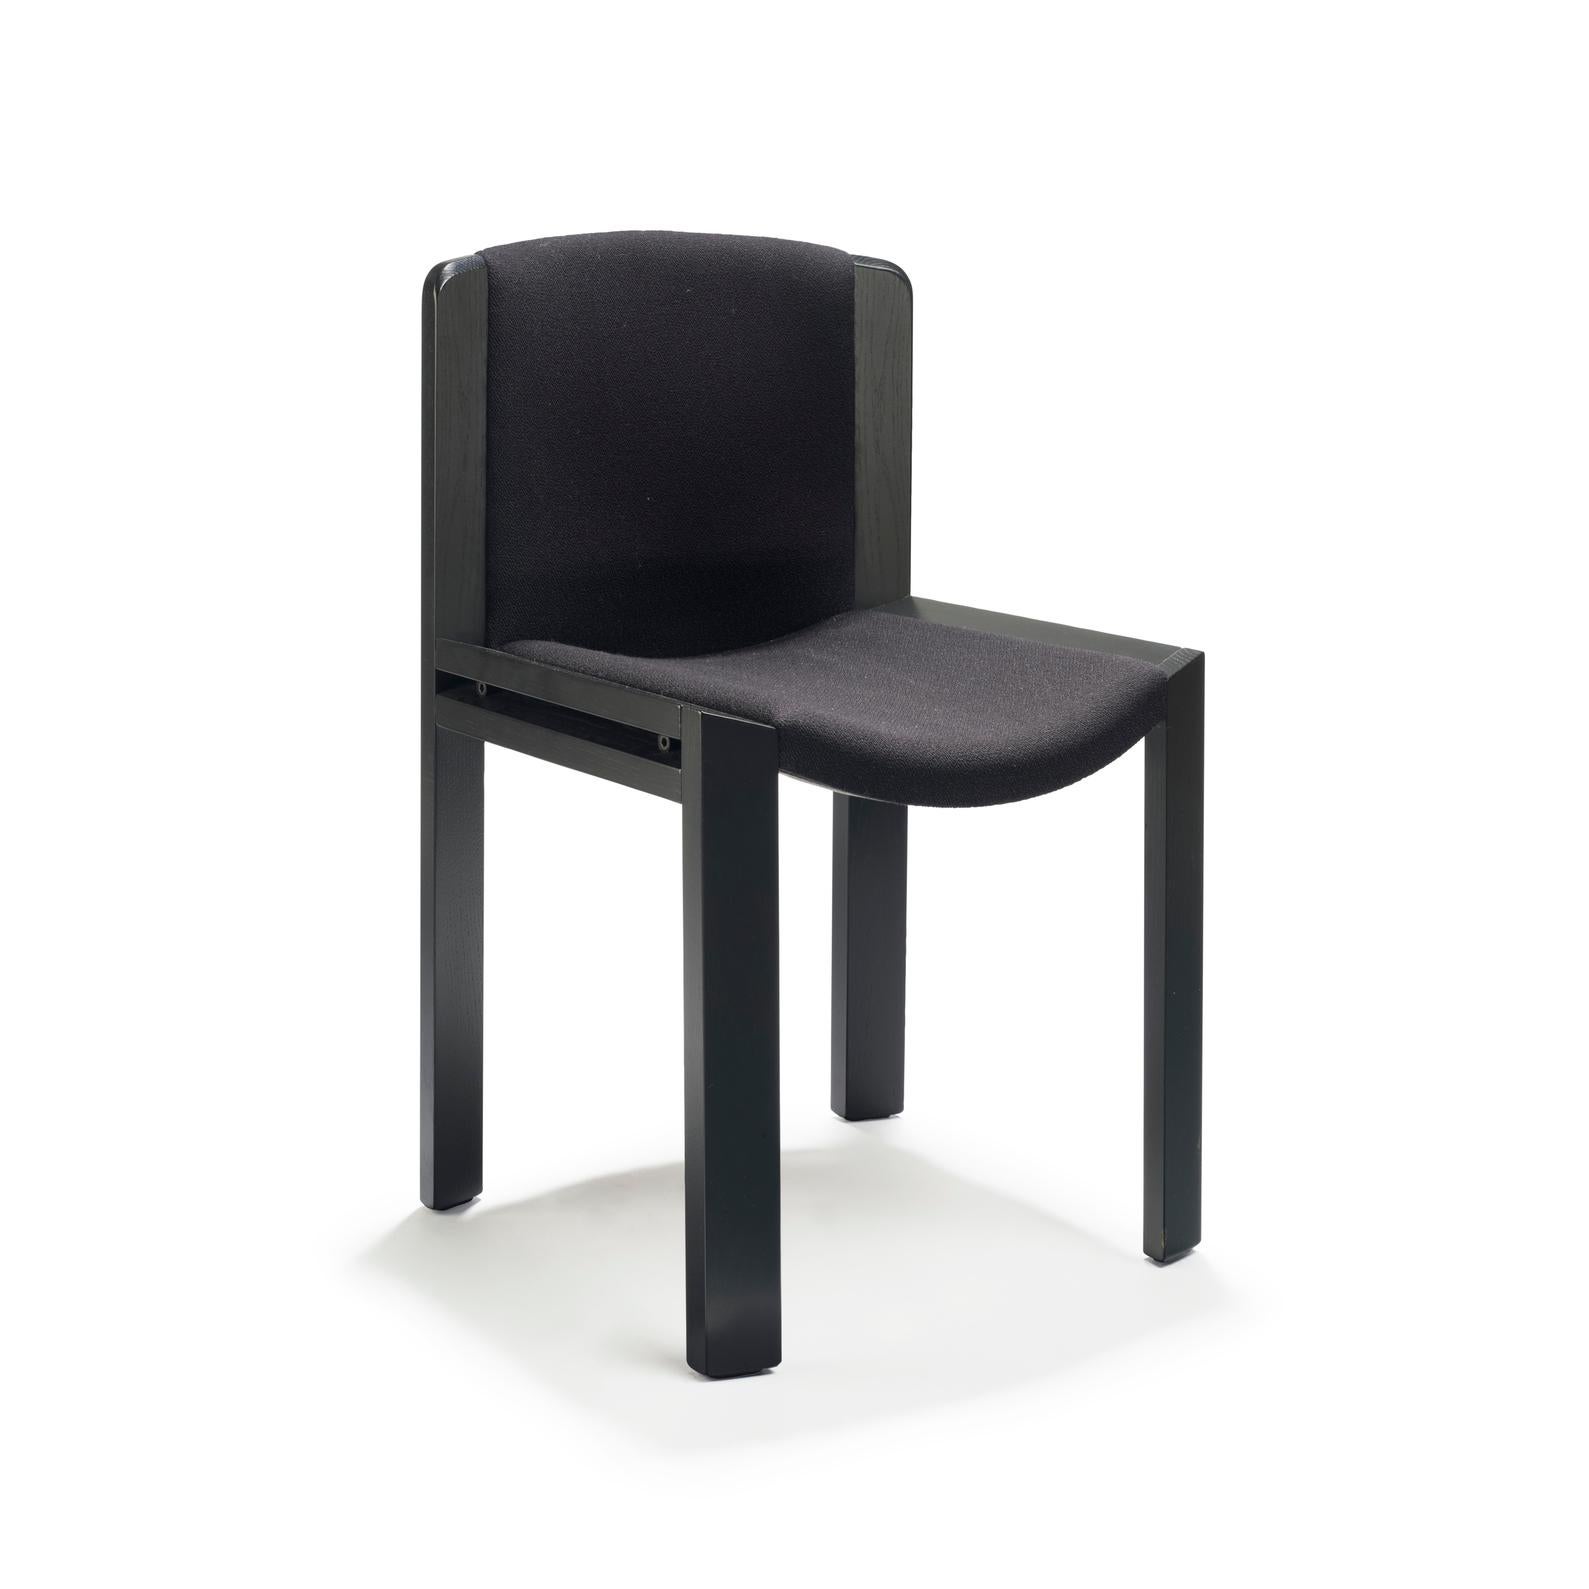 Contemporary Set of Four Joe Colombo 'Chair 300' Wood and Kvadrat Fabric by Karakter For Sale